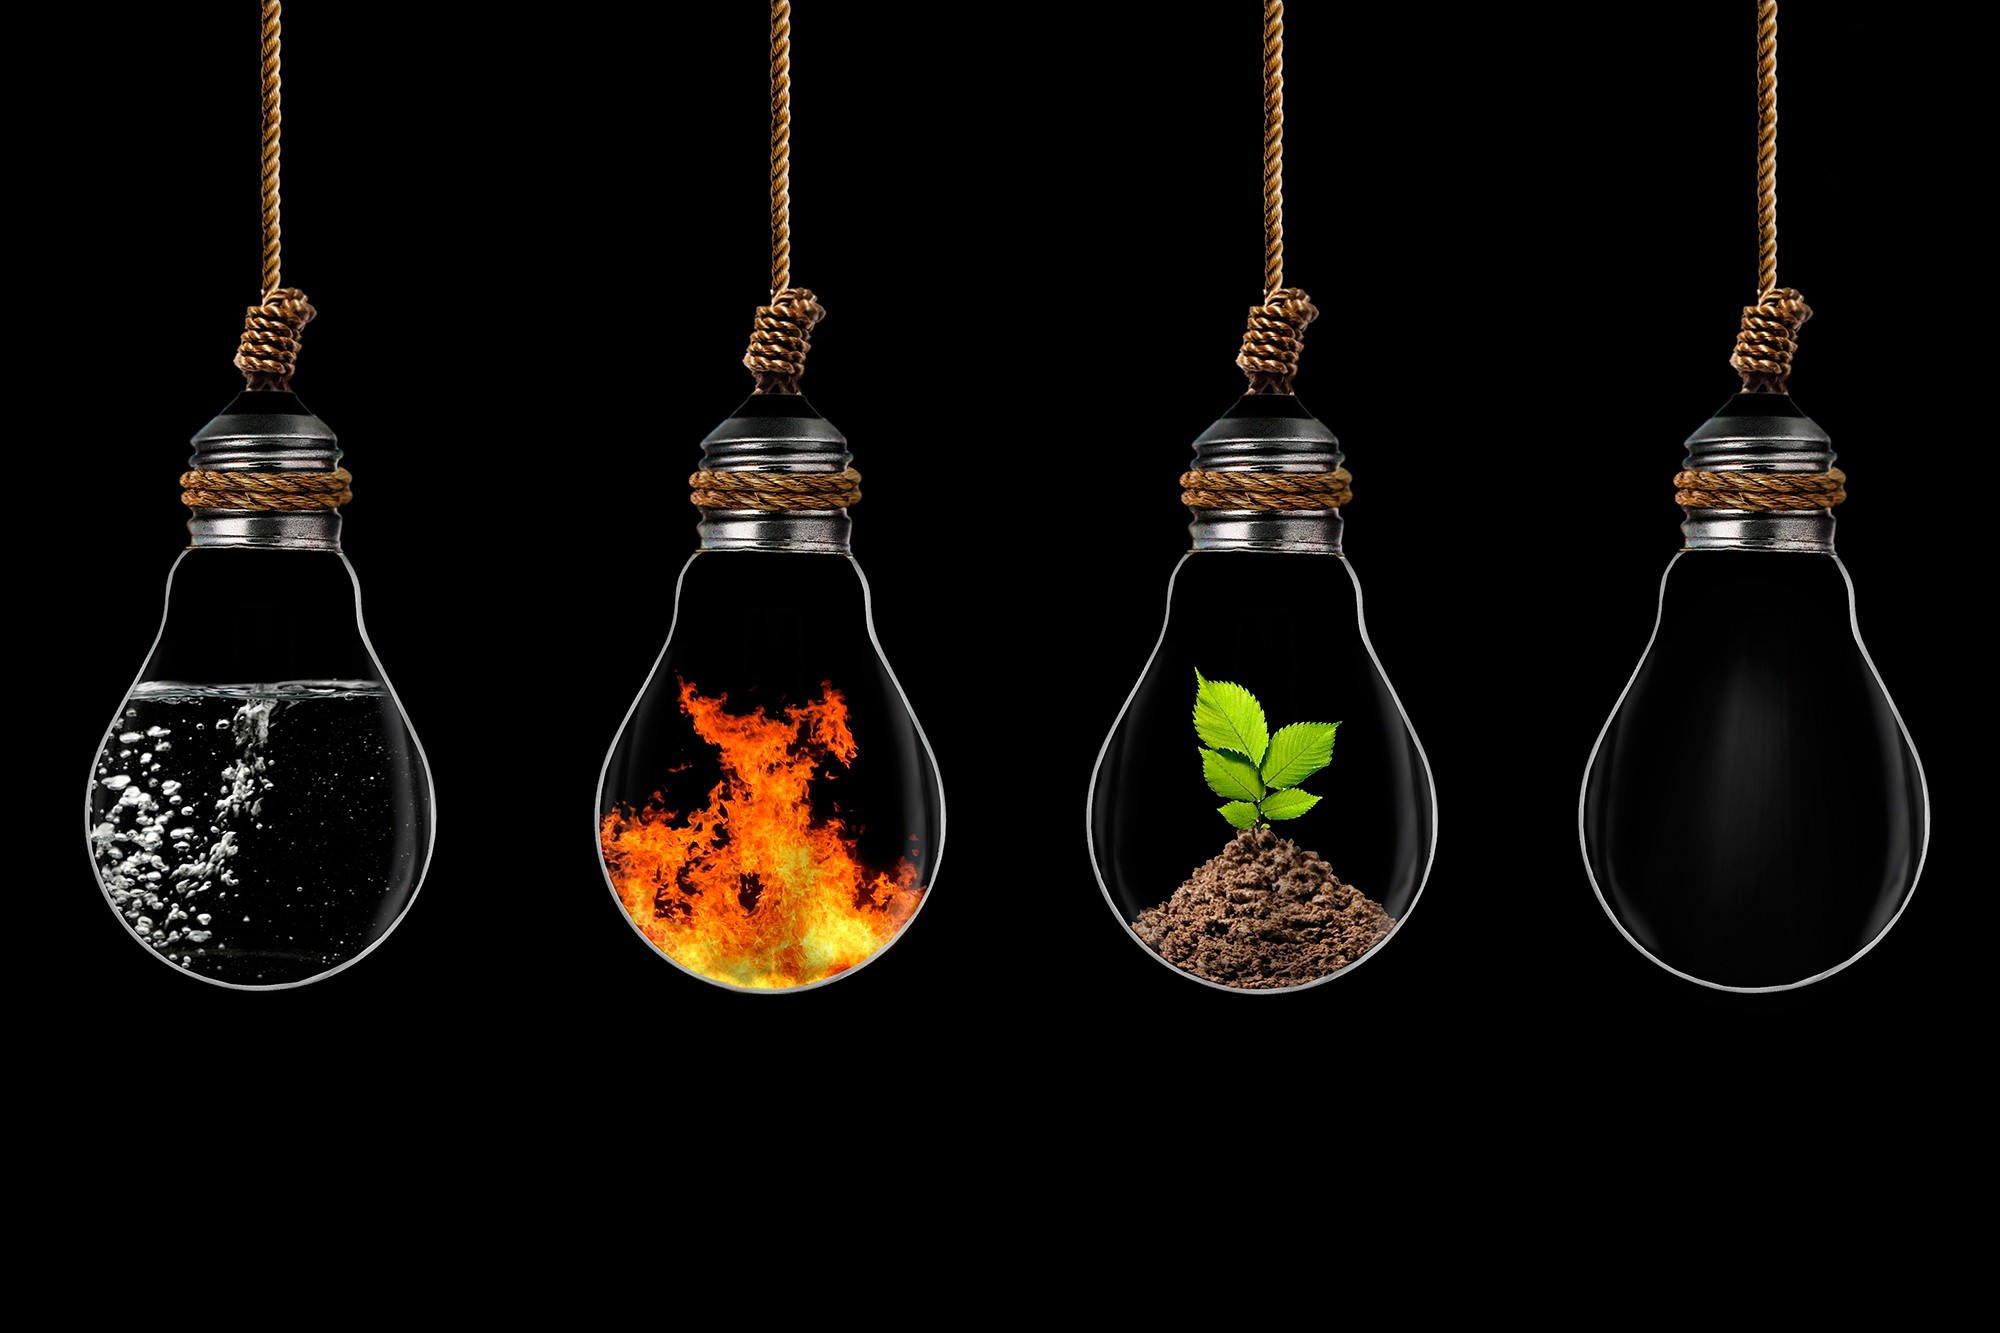 General 2000x1333 digital art light bulb ropes water fire plants ground black background four elements